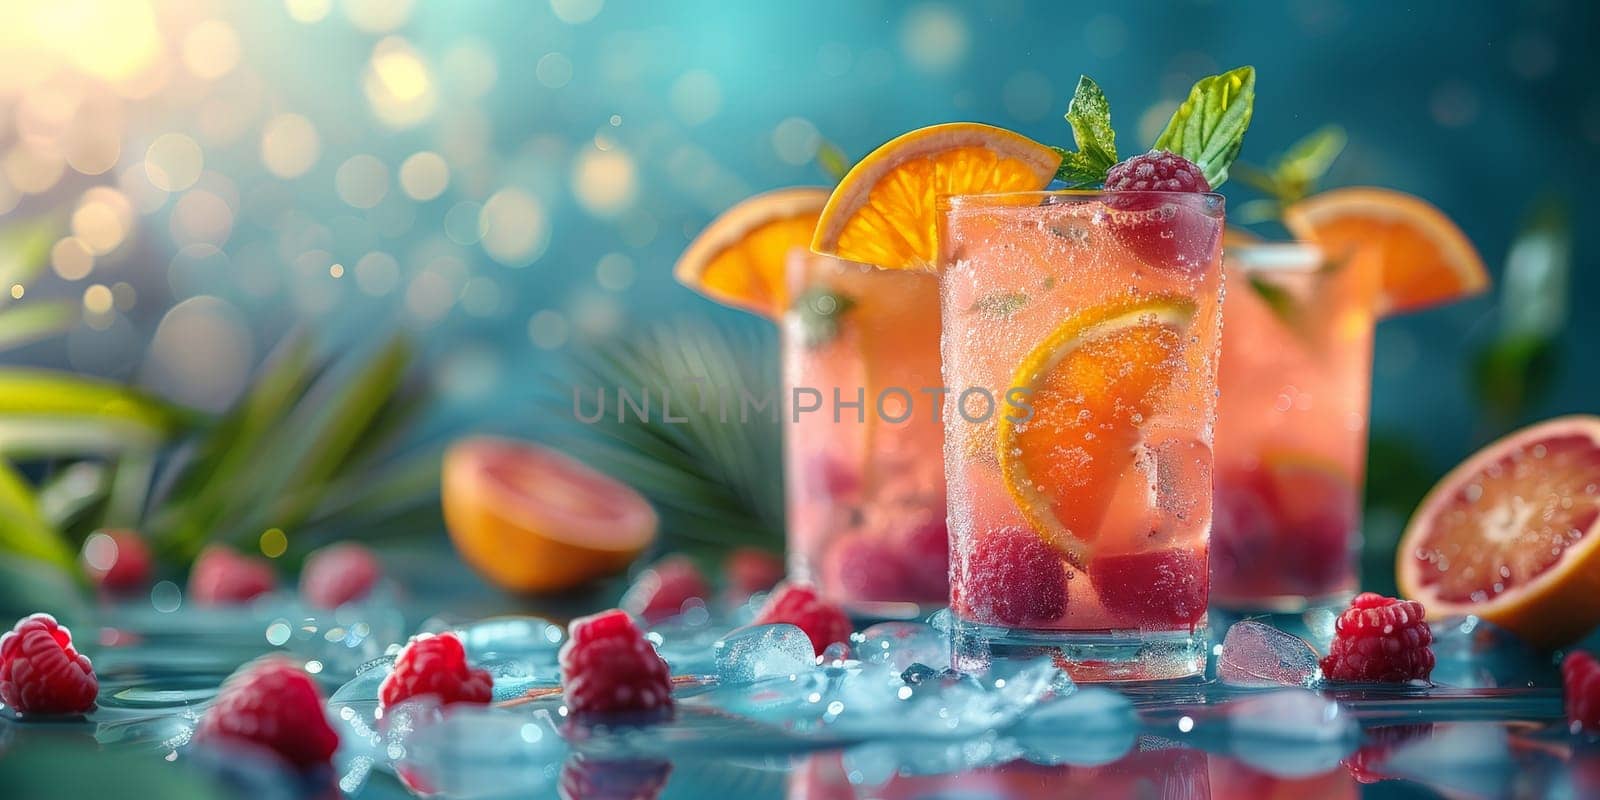 A glass of pink drink with raspberries and oranges. The drink is served in three glasses